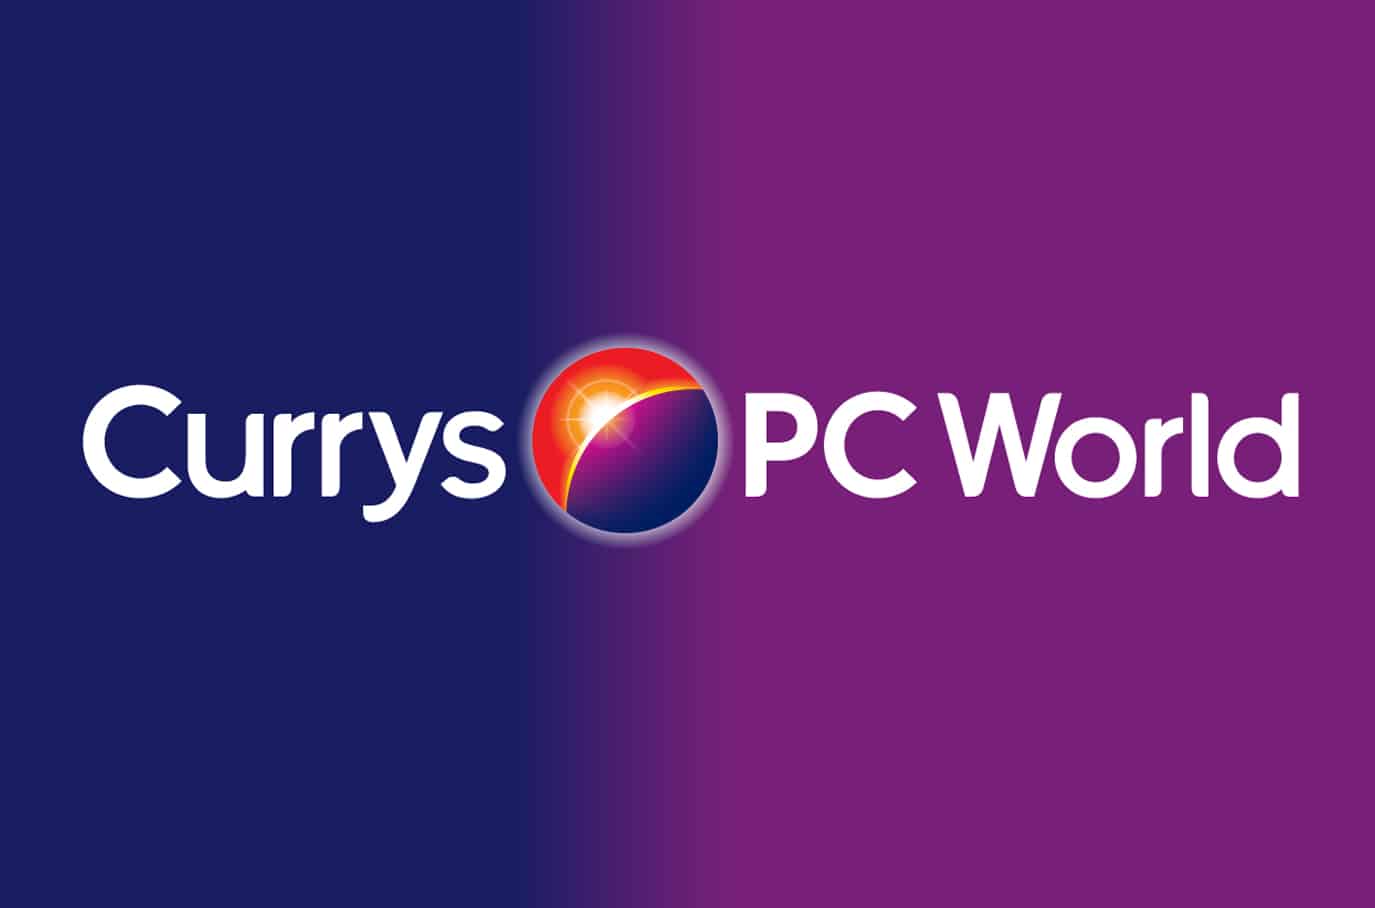 Record Black Friday for Currys and PC World